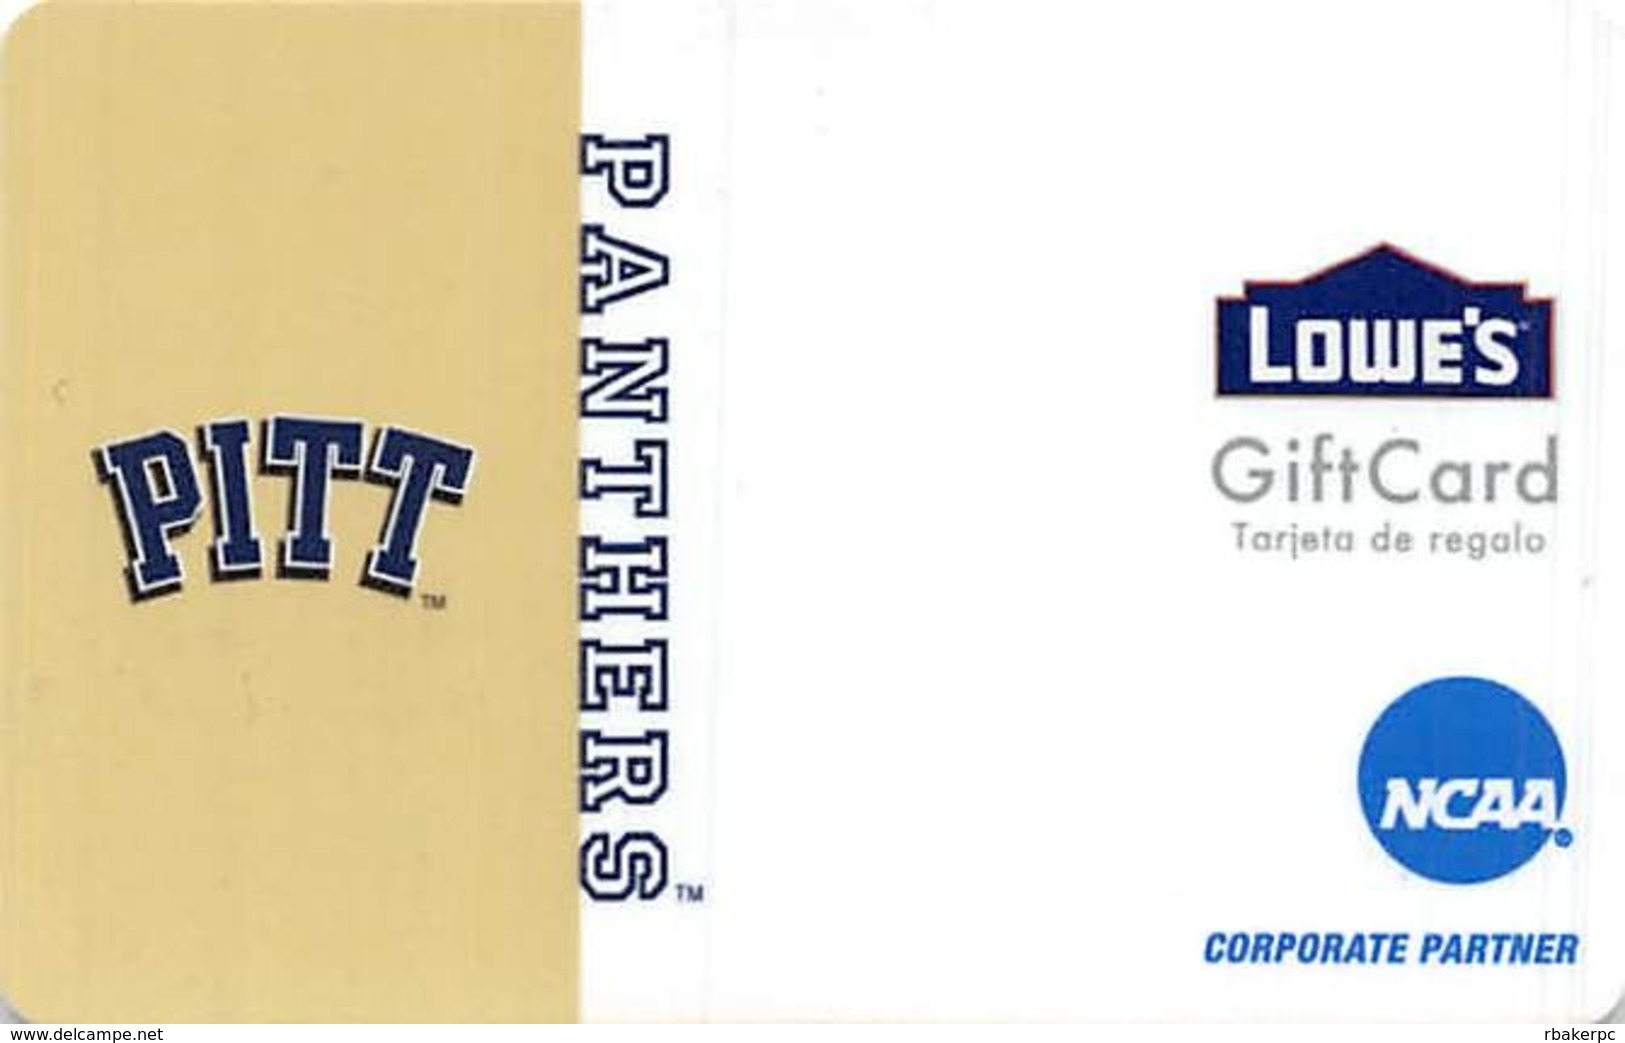 Lowes NCAA Gift Card - PITT Panthers - Gift Cards